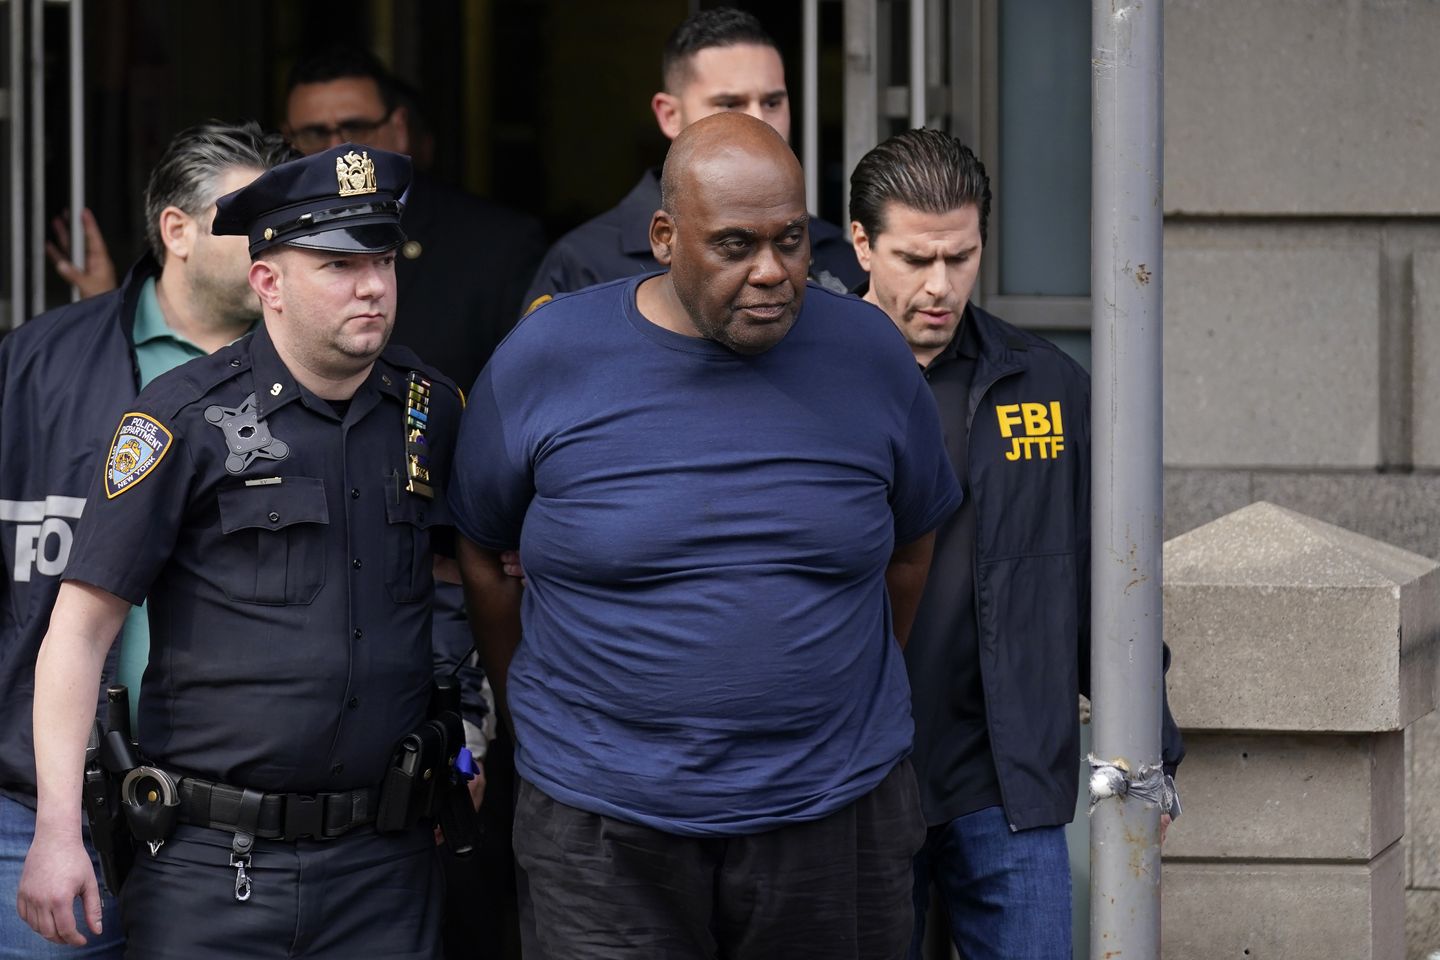 Grand jury indicts suspect in Brooklyn subway mass shooting